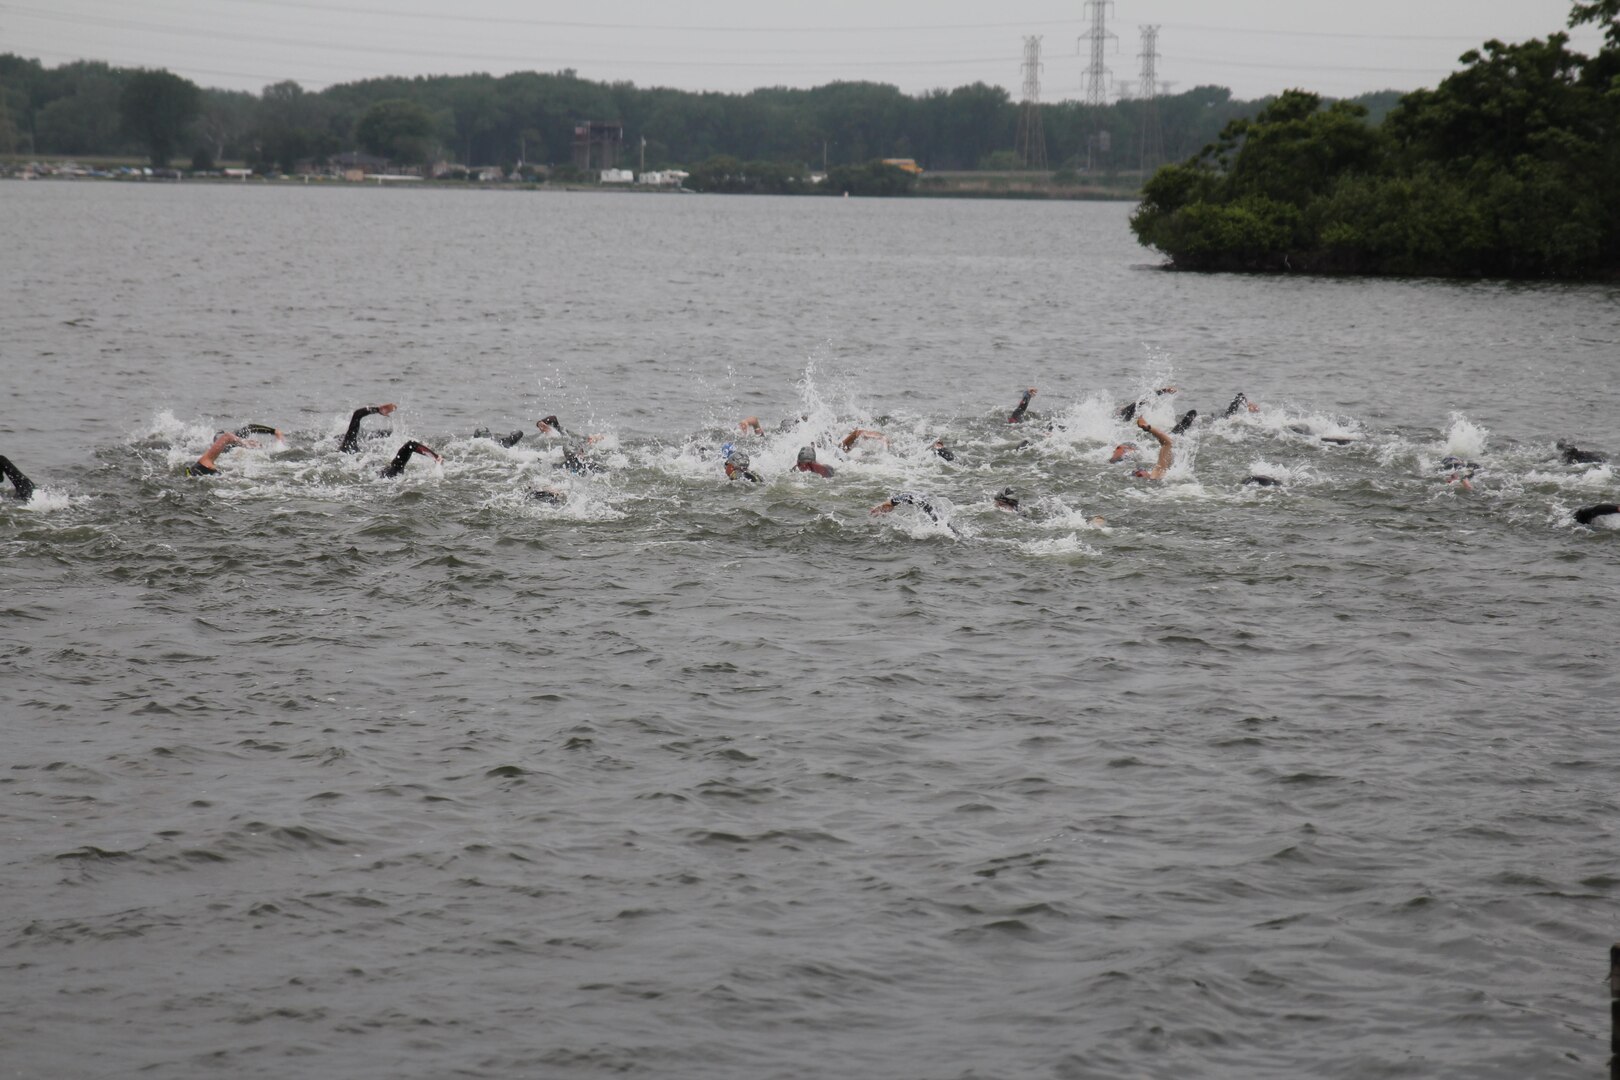 Start of the men's race of the 2015 Armed Forces Triathlon Championship at Wolf Lake in Hammond, Ind. held in conjunction with Leon's Triathlon on June 7, 2015.